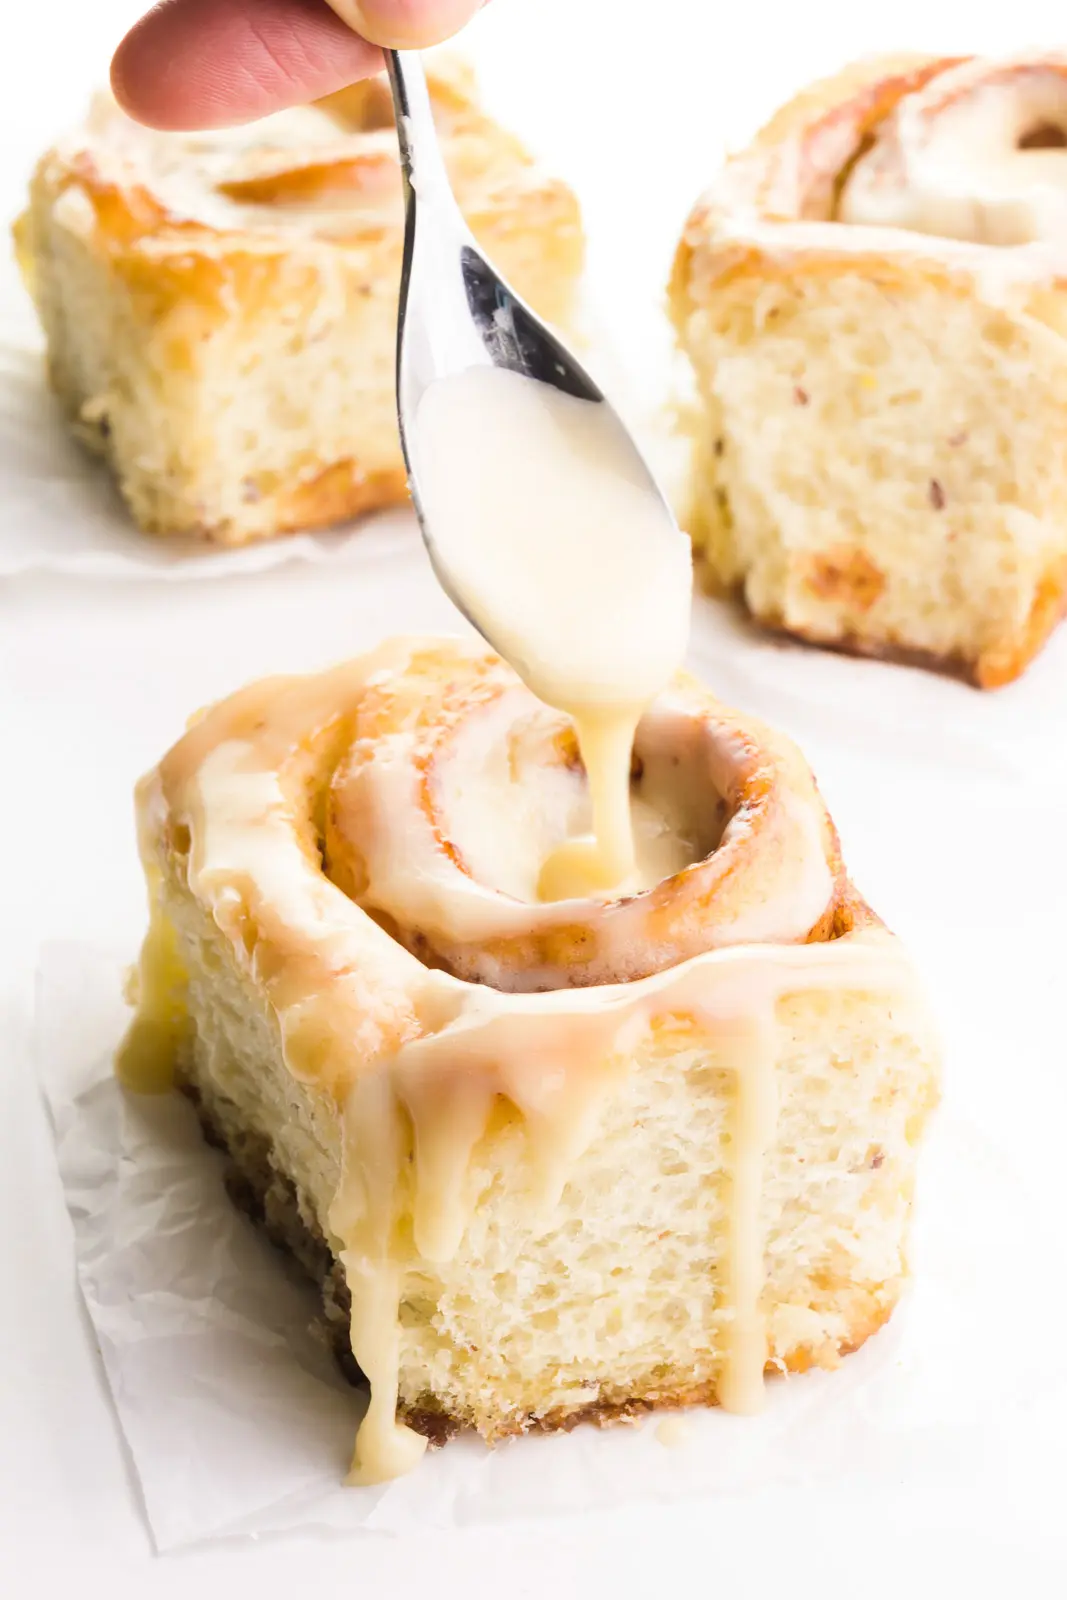 Three vegan cinnamon rolls are on a counter. A hand holds a spoon drizzling frosting over the top of one of them.